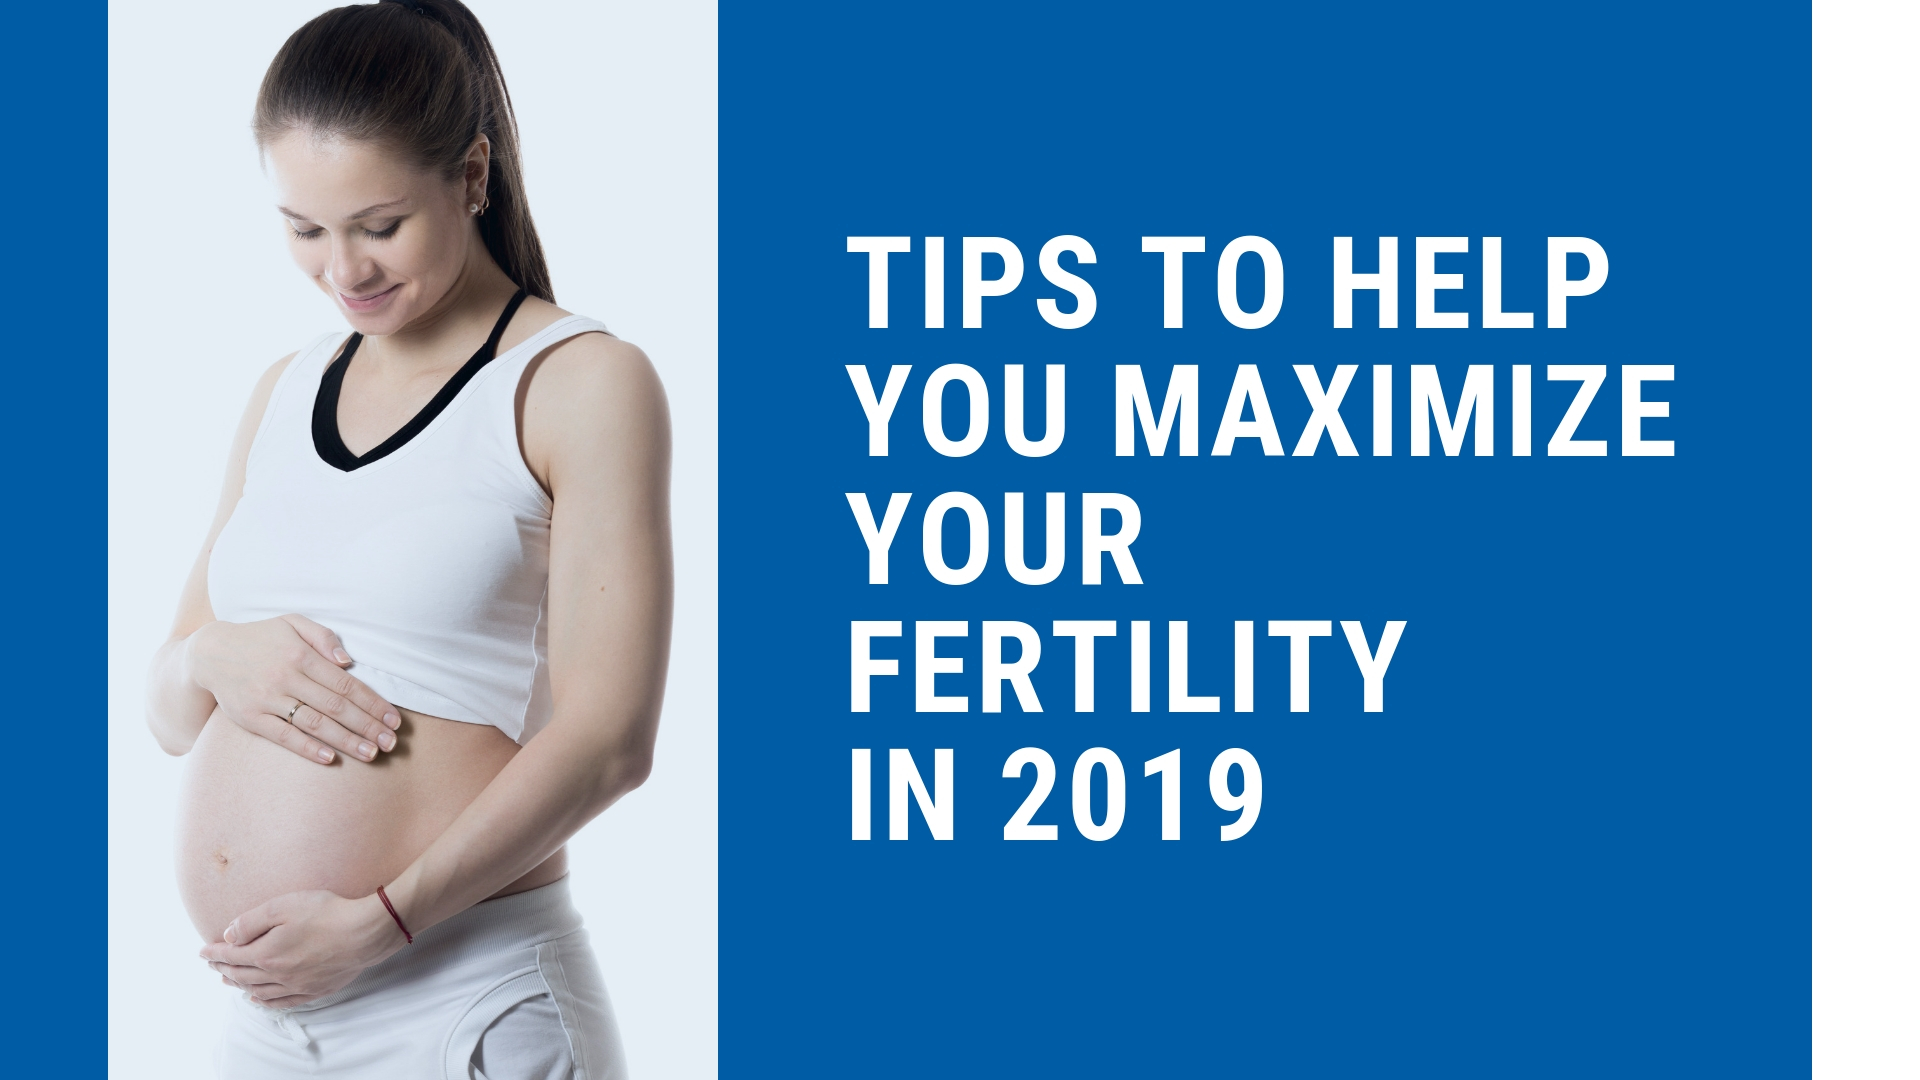 Tips To Help You Maximize Your Fertility In 2019